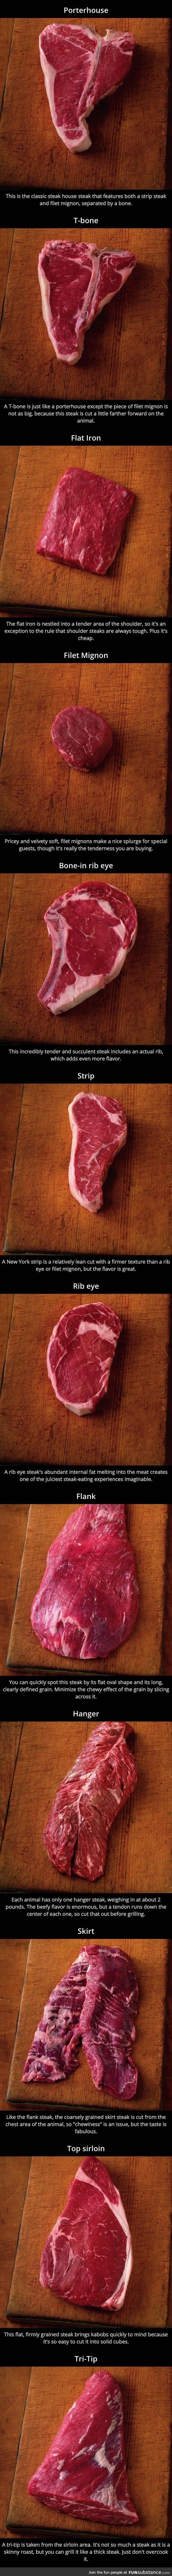 The 12 Different Types Of Steak